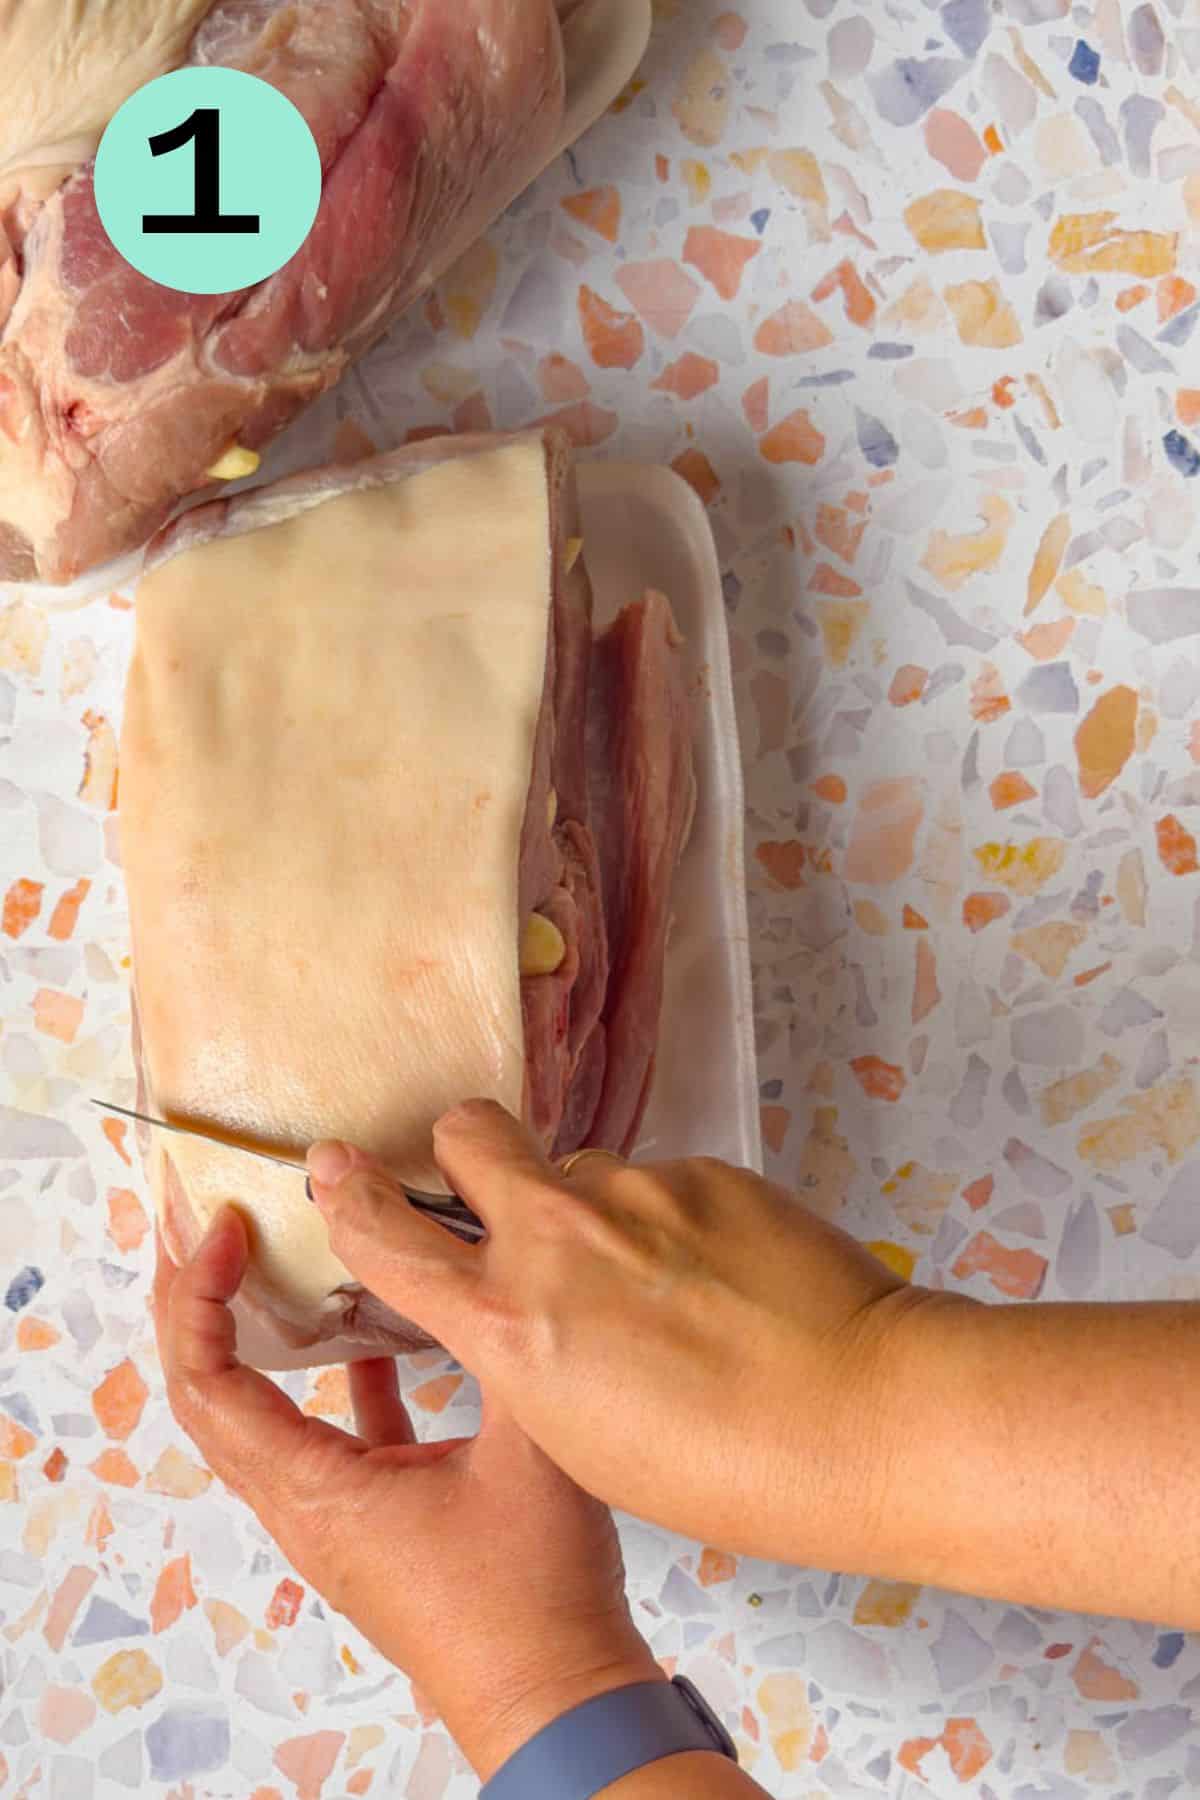 Scoring the skin of the pork roast with a sharp pairing knife.